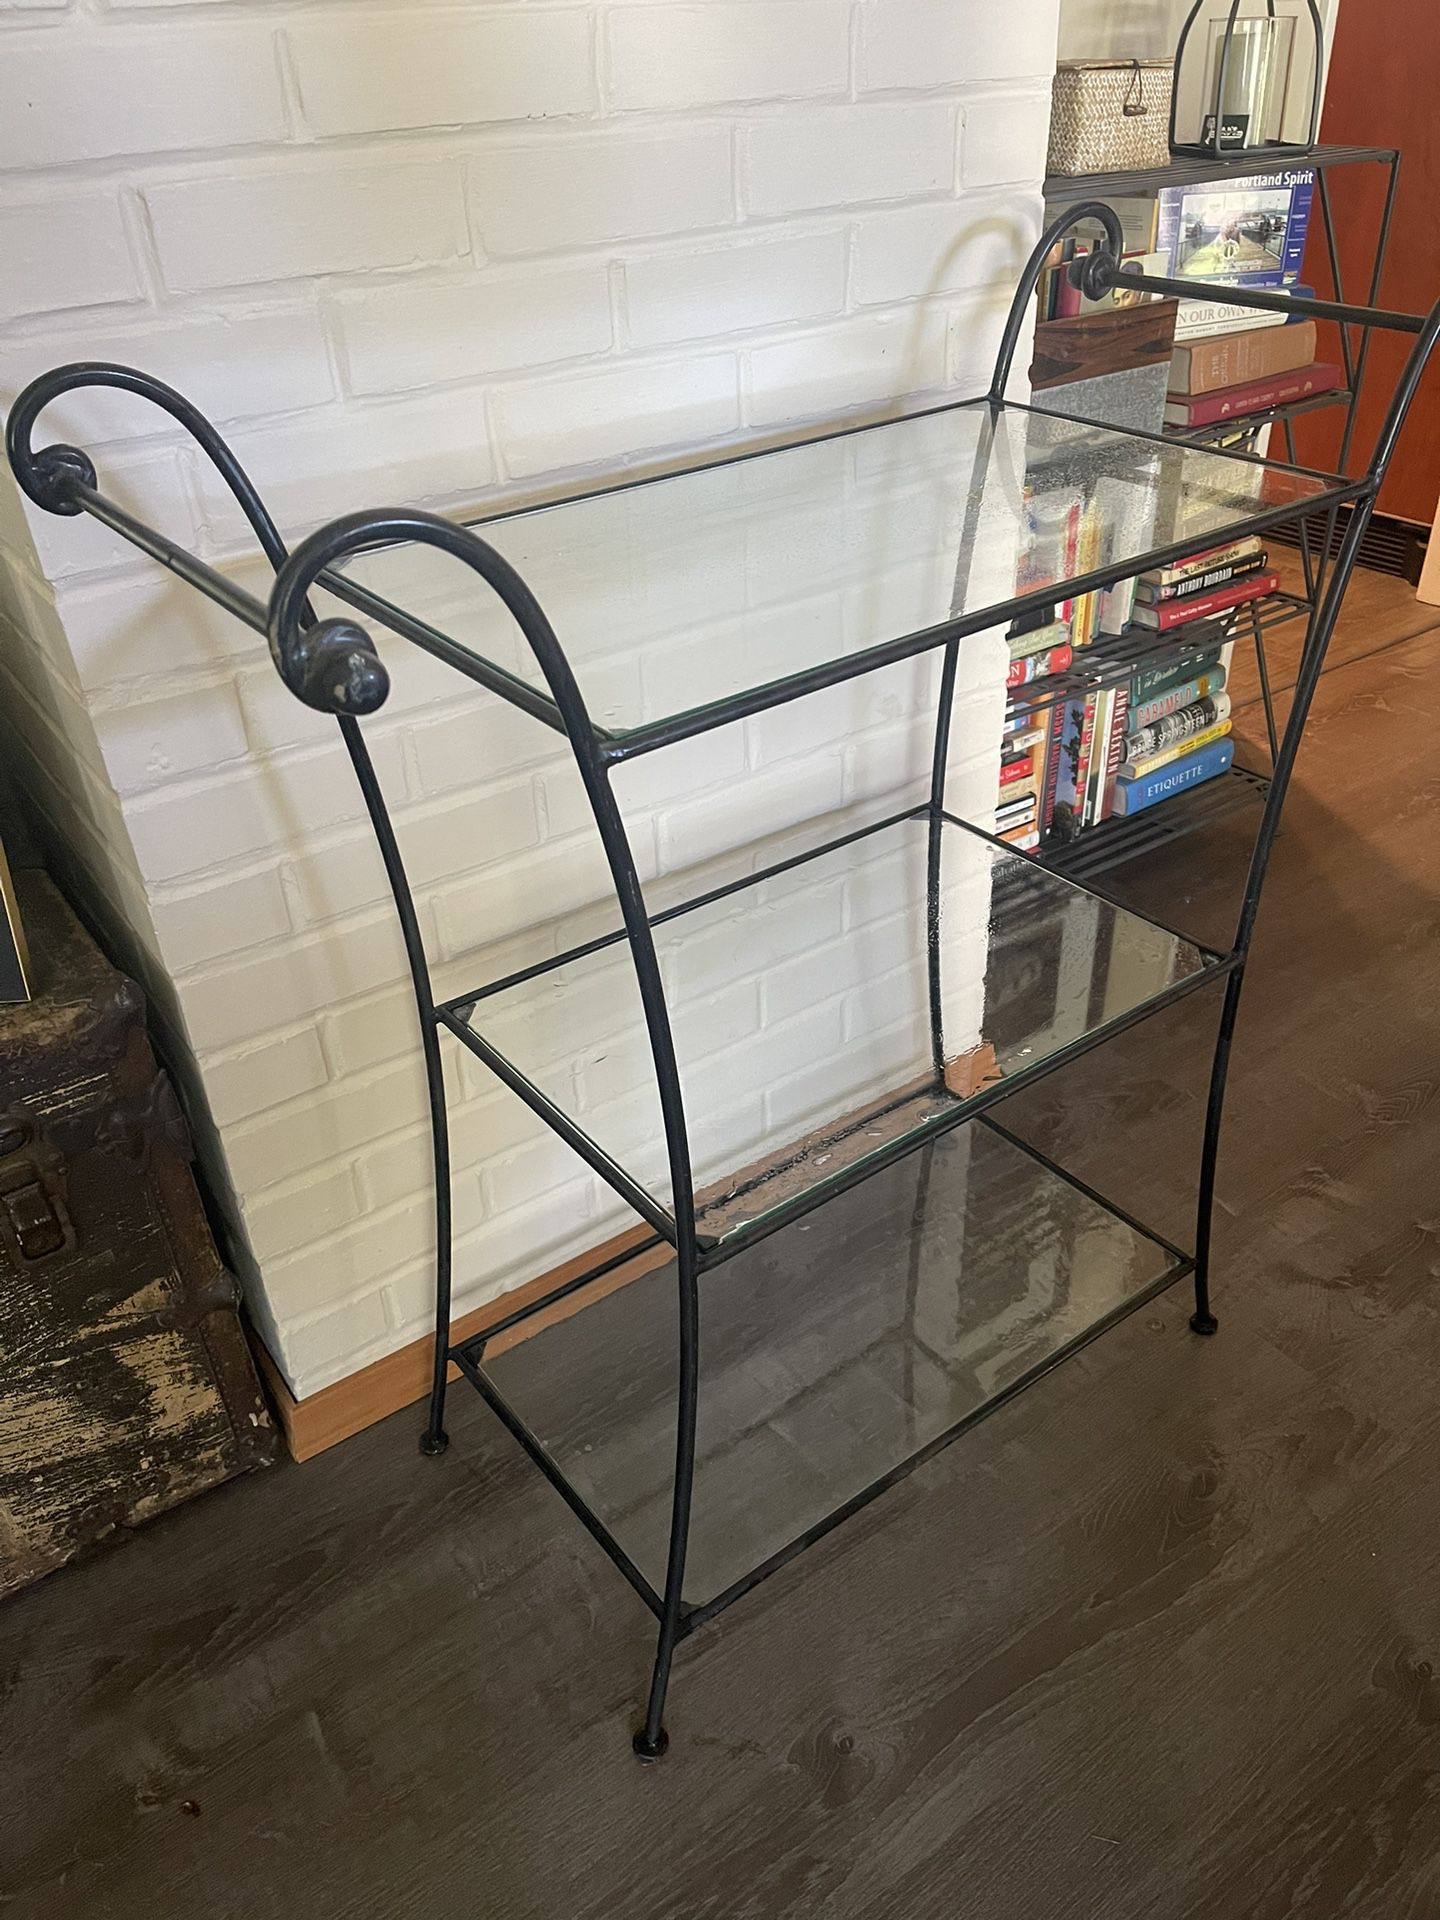 3 Tier Glass Top Table from Pier 1